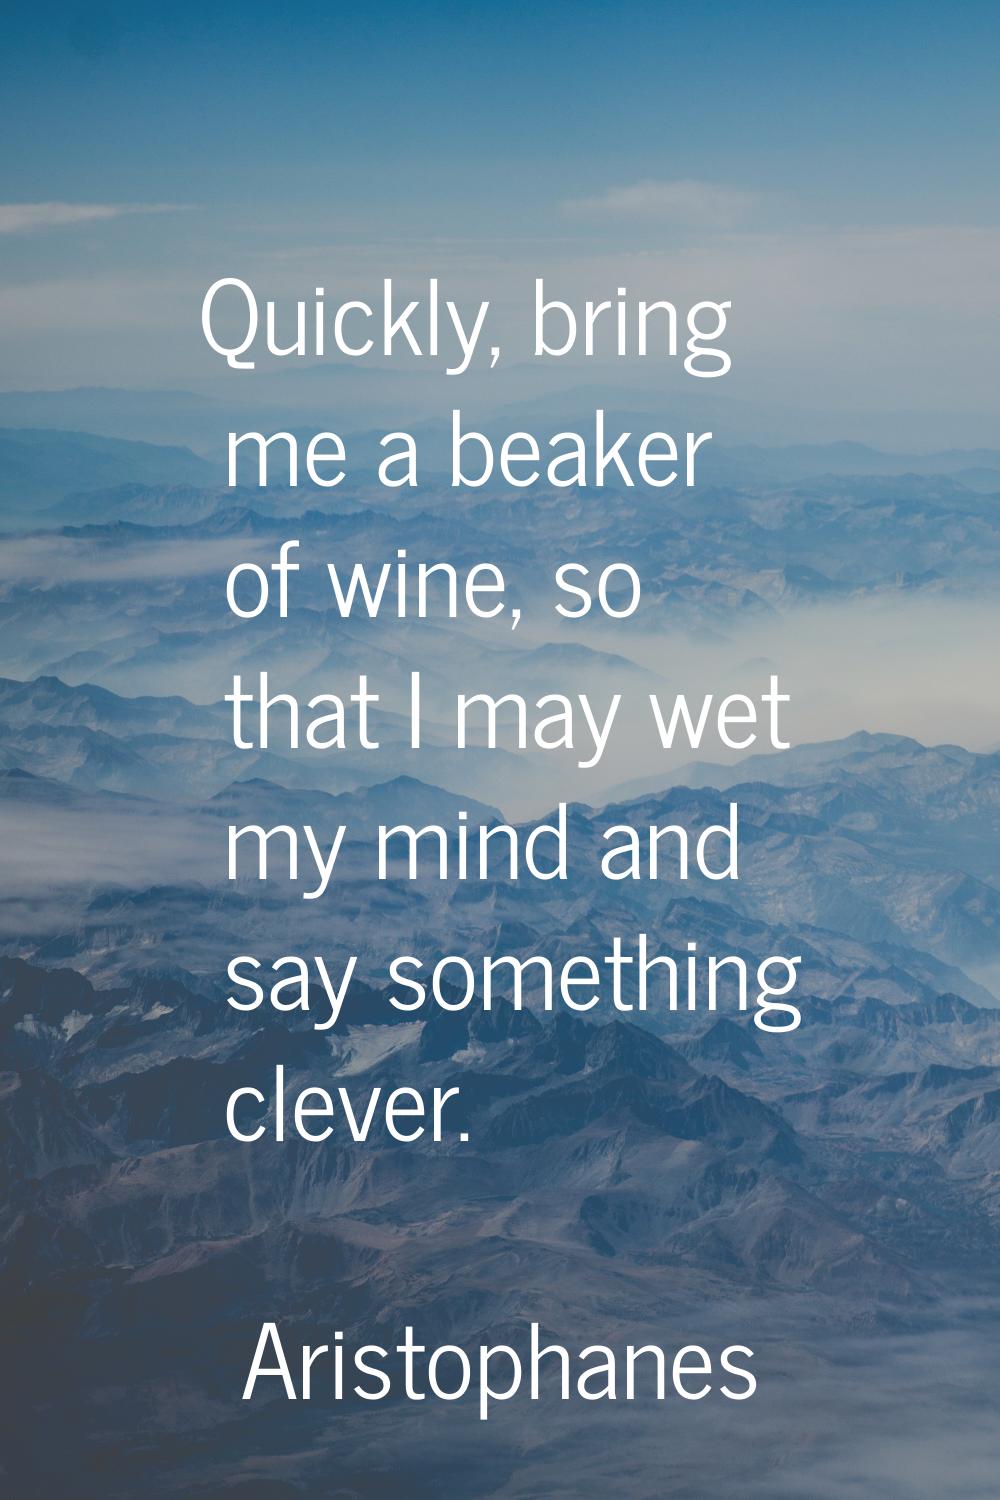 Quickly, bring me a beaker of wine, so that I may wet my mind and say something clever.